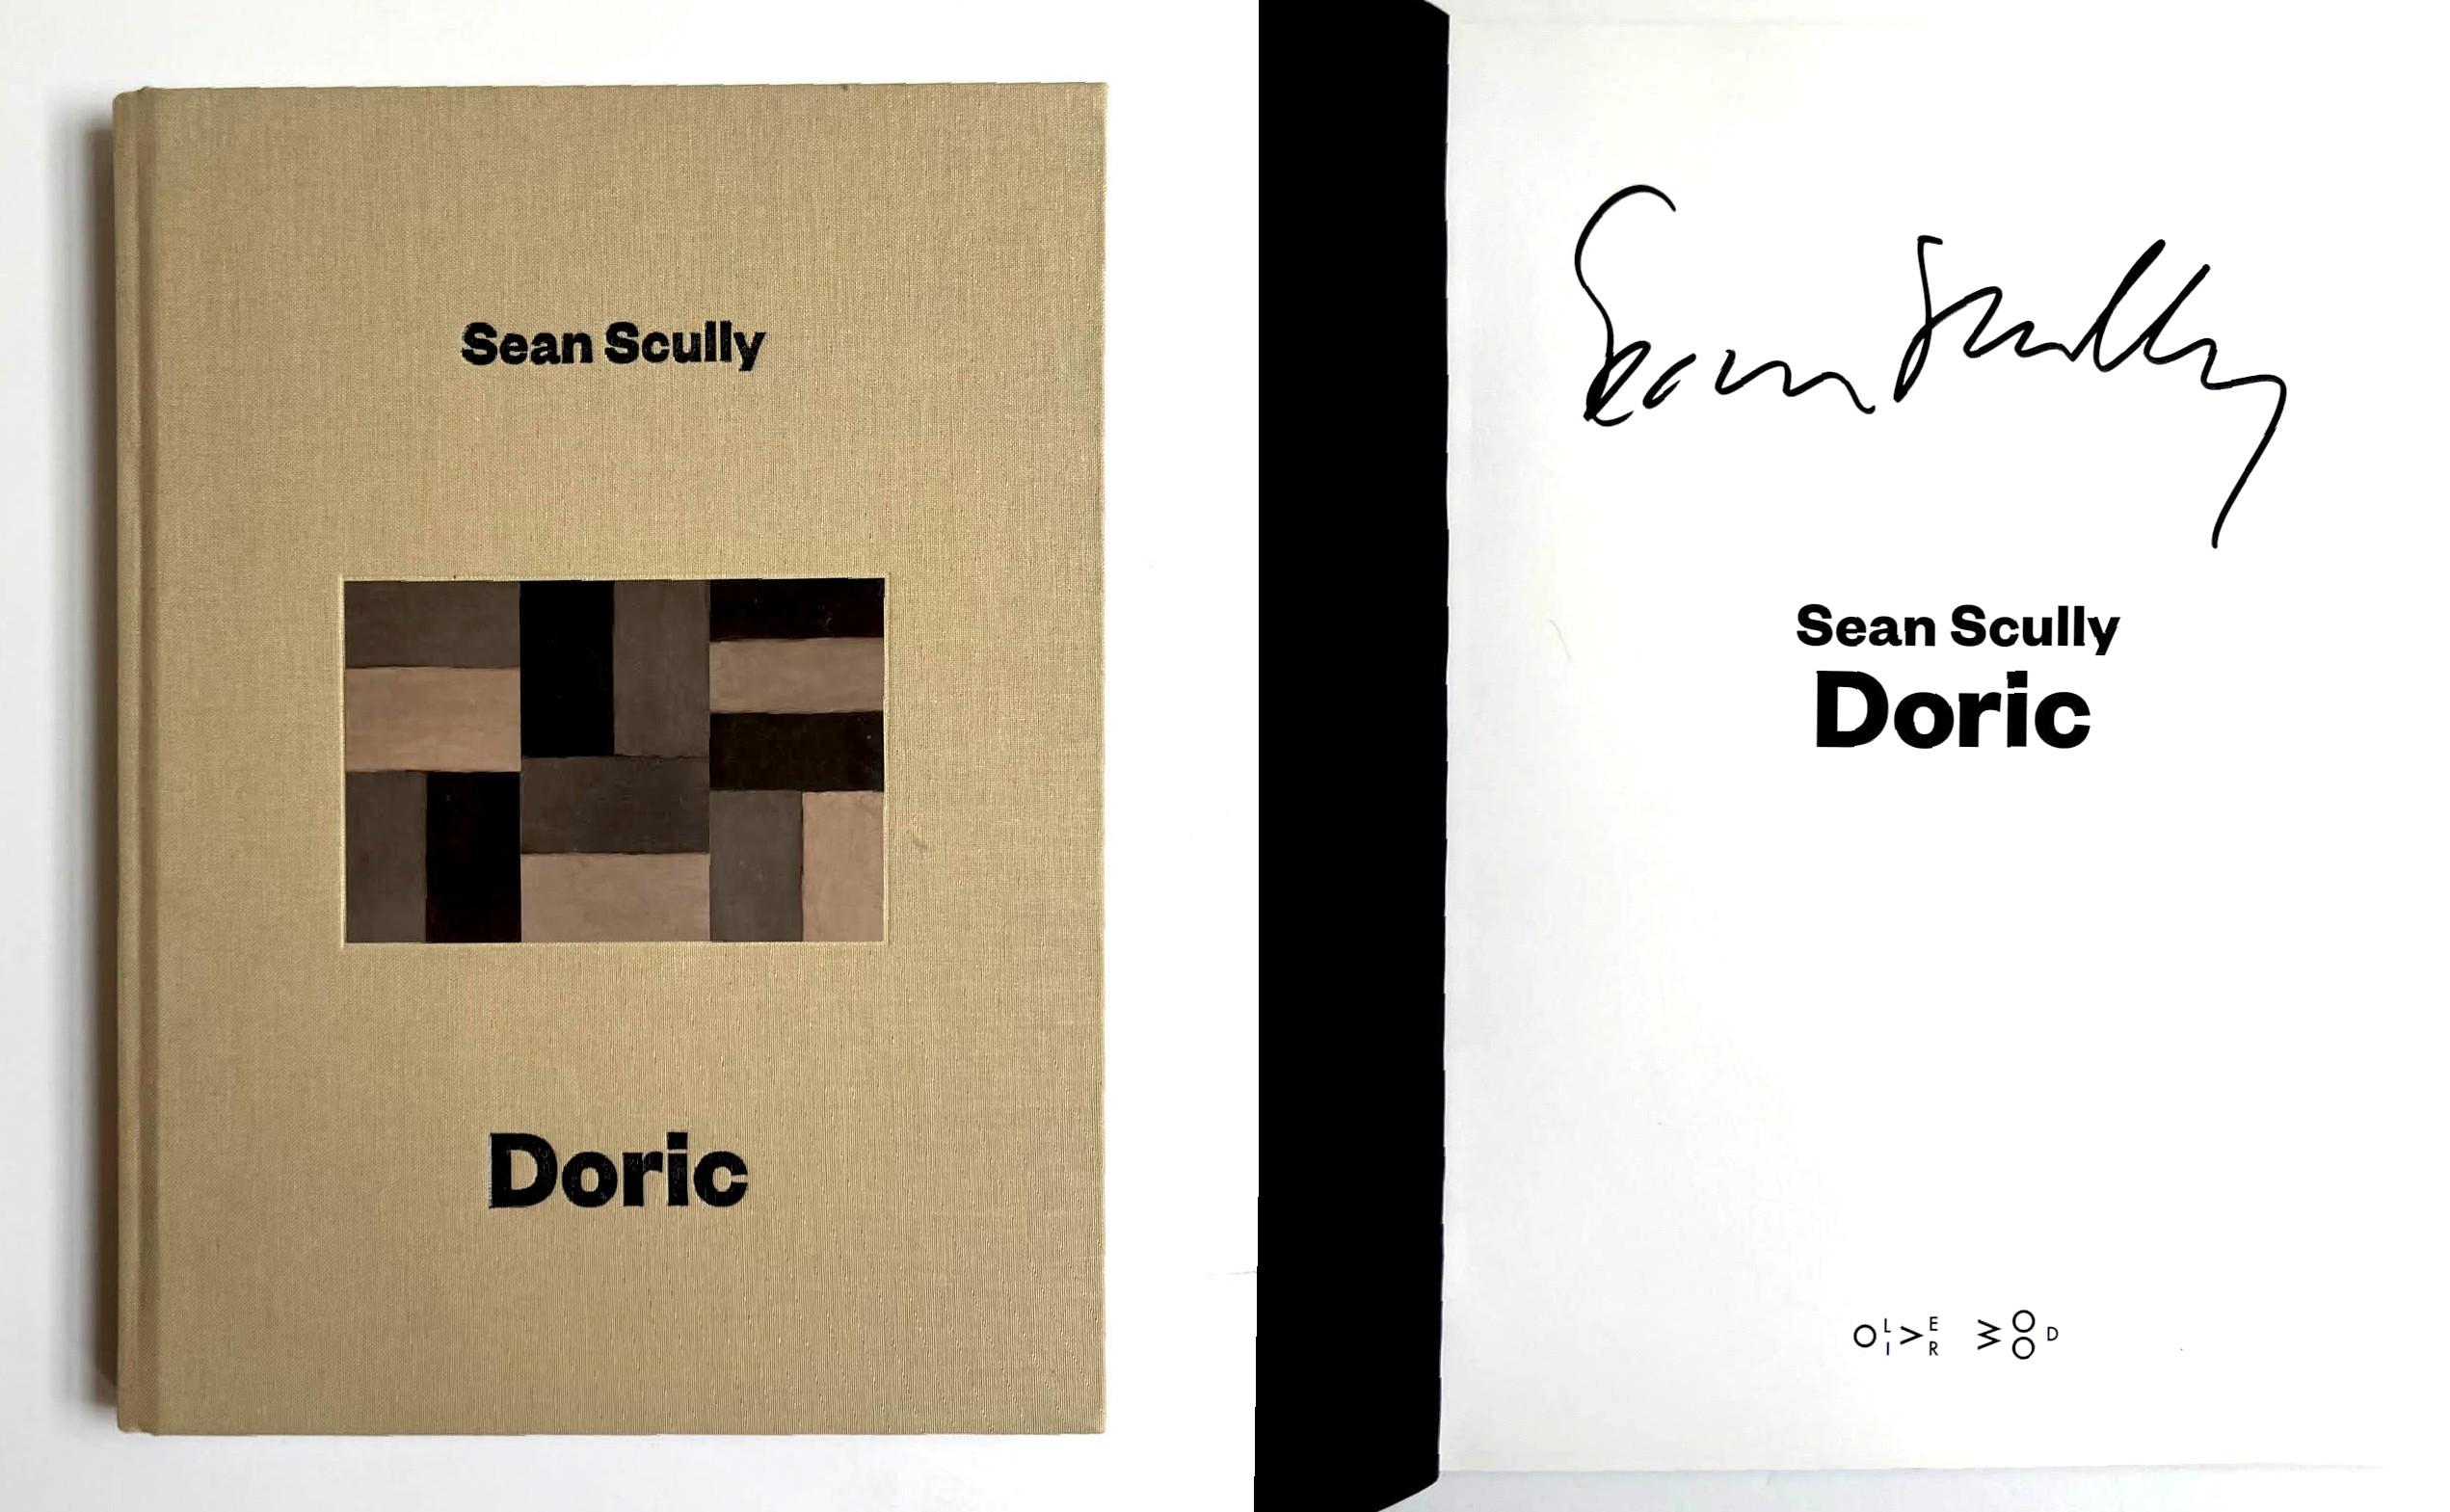 Sean Scully
Doric (Hand signed by Sean Scully), 2012
Hardback monograph (hand signed by Sean Scully on the title page)
 Hand signed by Sean Scully for the present owner at a special event held at New York City's The Drawing Center in September,